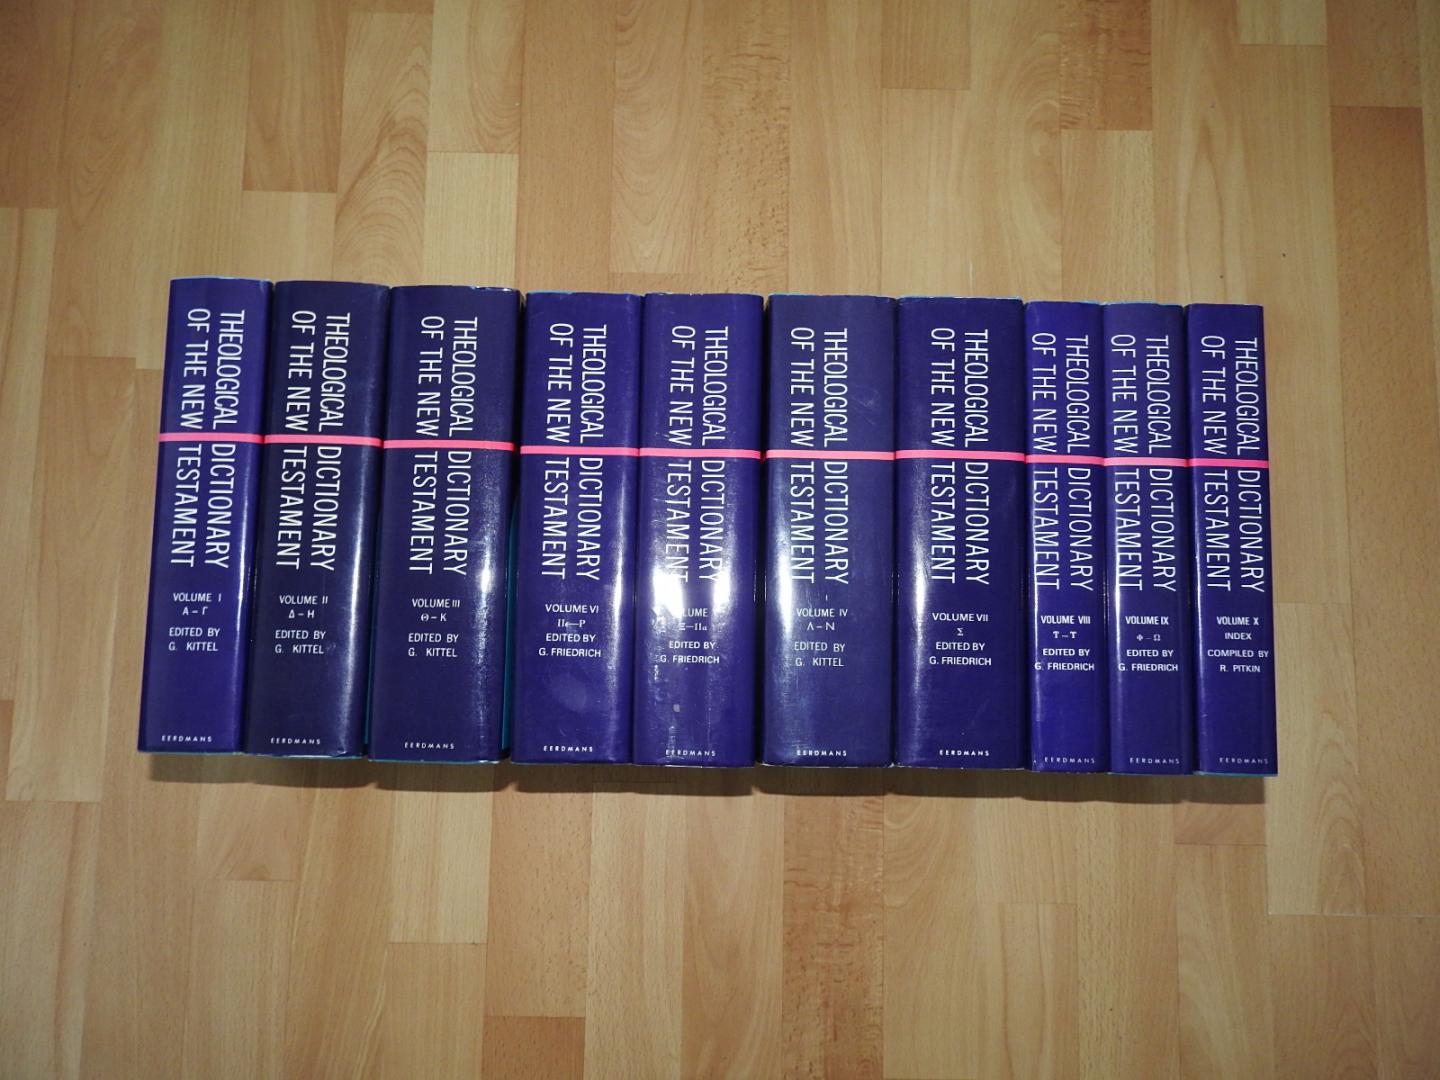 Kittel, Gerhard / Friedrich, Gerhard / Bromiley, Geoffrey W. - Theological Dictionary of the New Testament. Translated and Edited by G.W.Bromiley. 10 Volumes (complete) VOLUME I.II.III.IV.V.VI.VII.VIII.IX.X